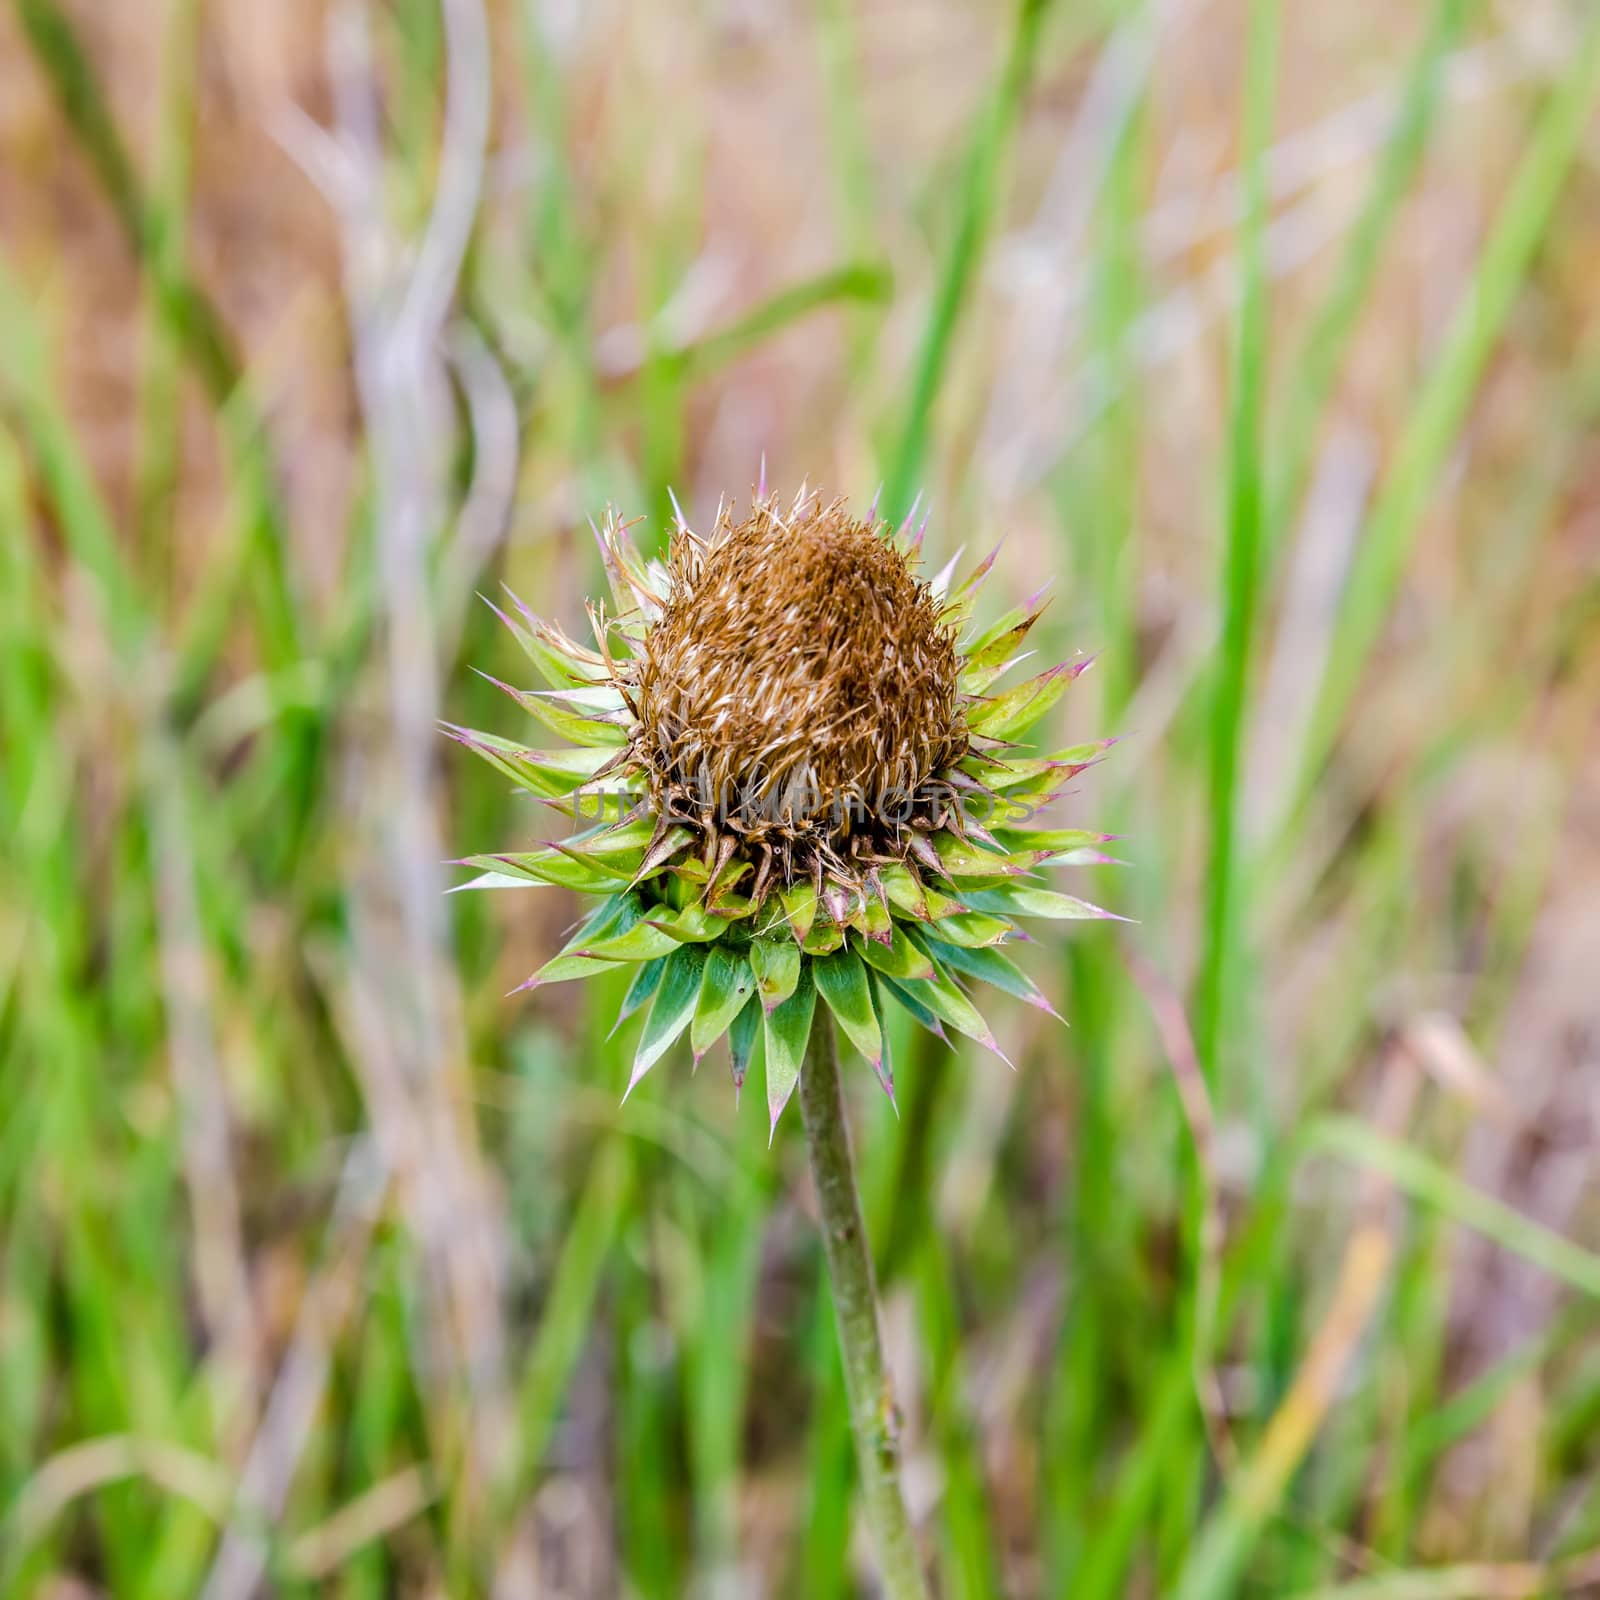 Thistle flower in the meadows. Onopordum Acanthium. Spiky plant  by digidreamgrafix